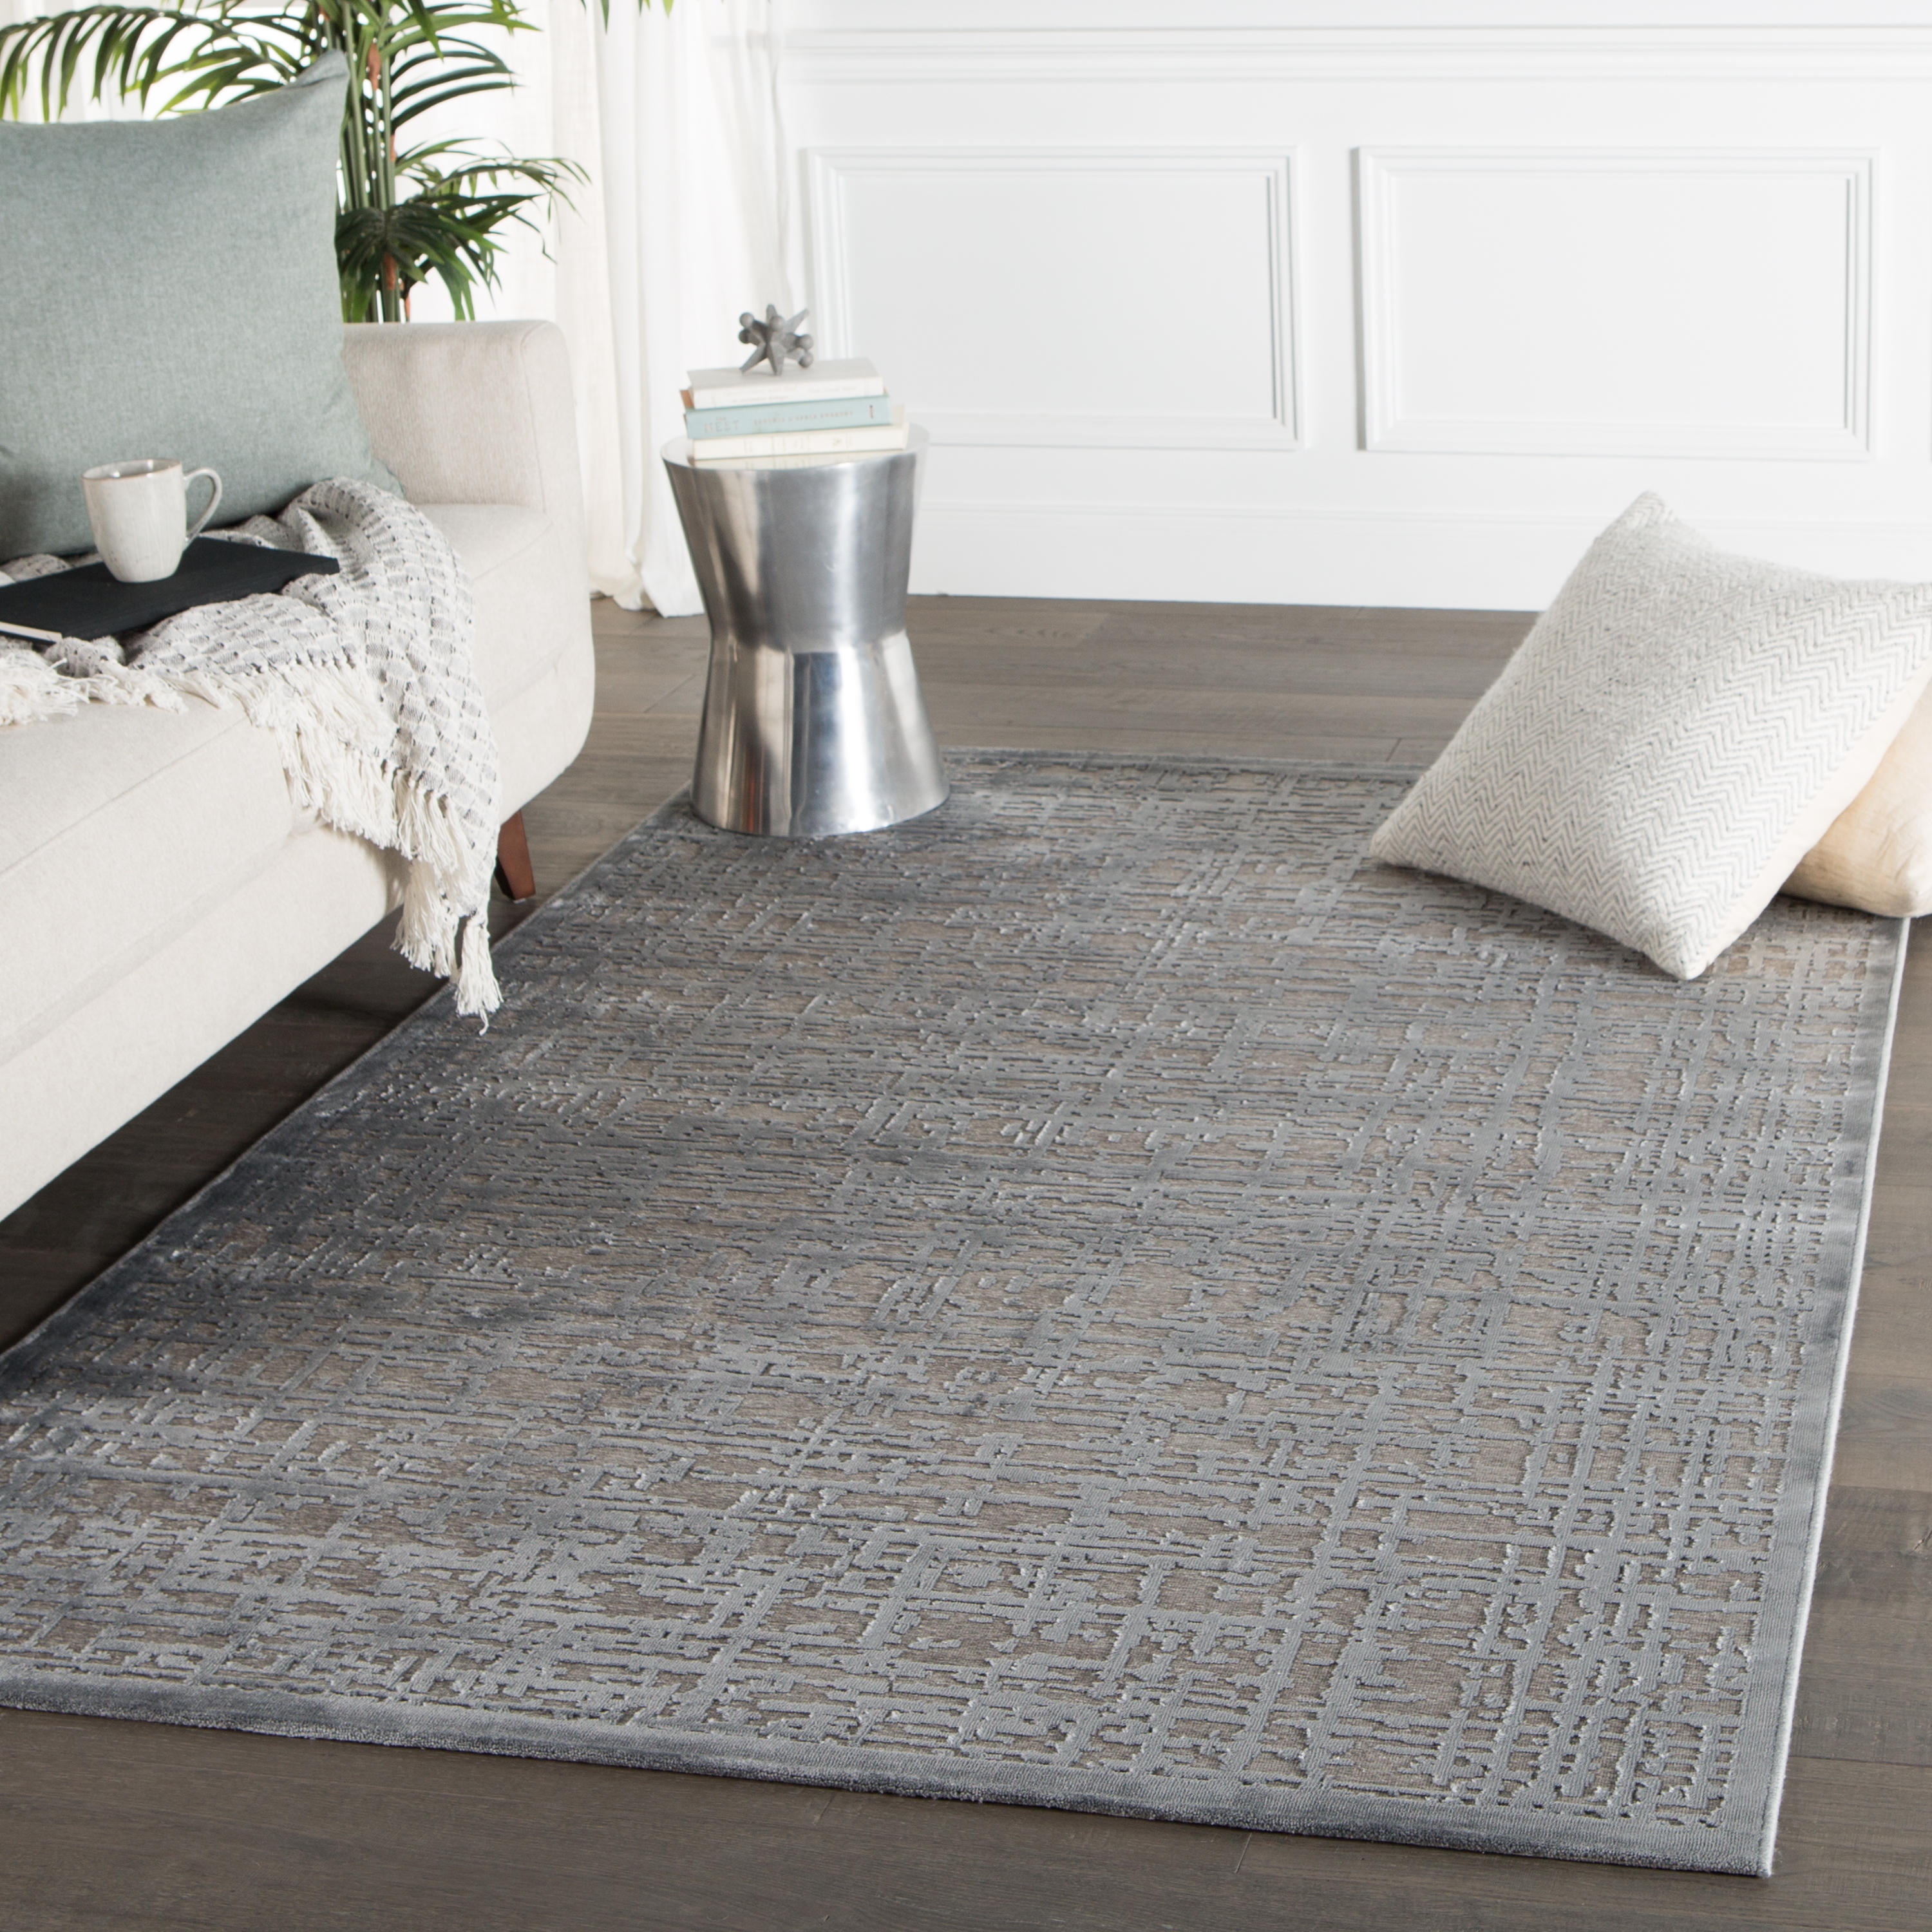 Dreamy Abstract Gray/ Silver Runner Rug (2'6"X8') - Image 4